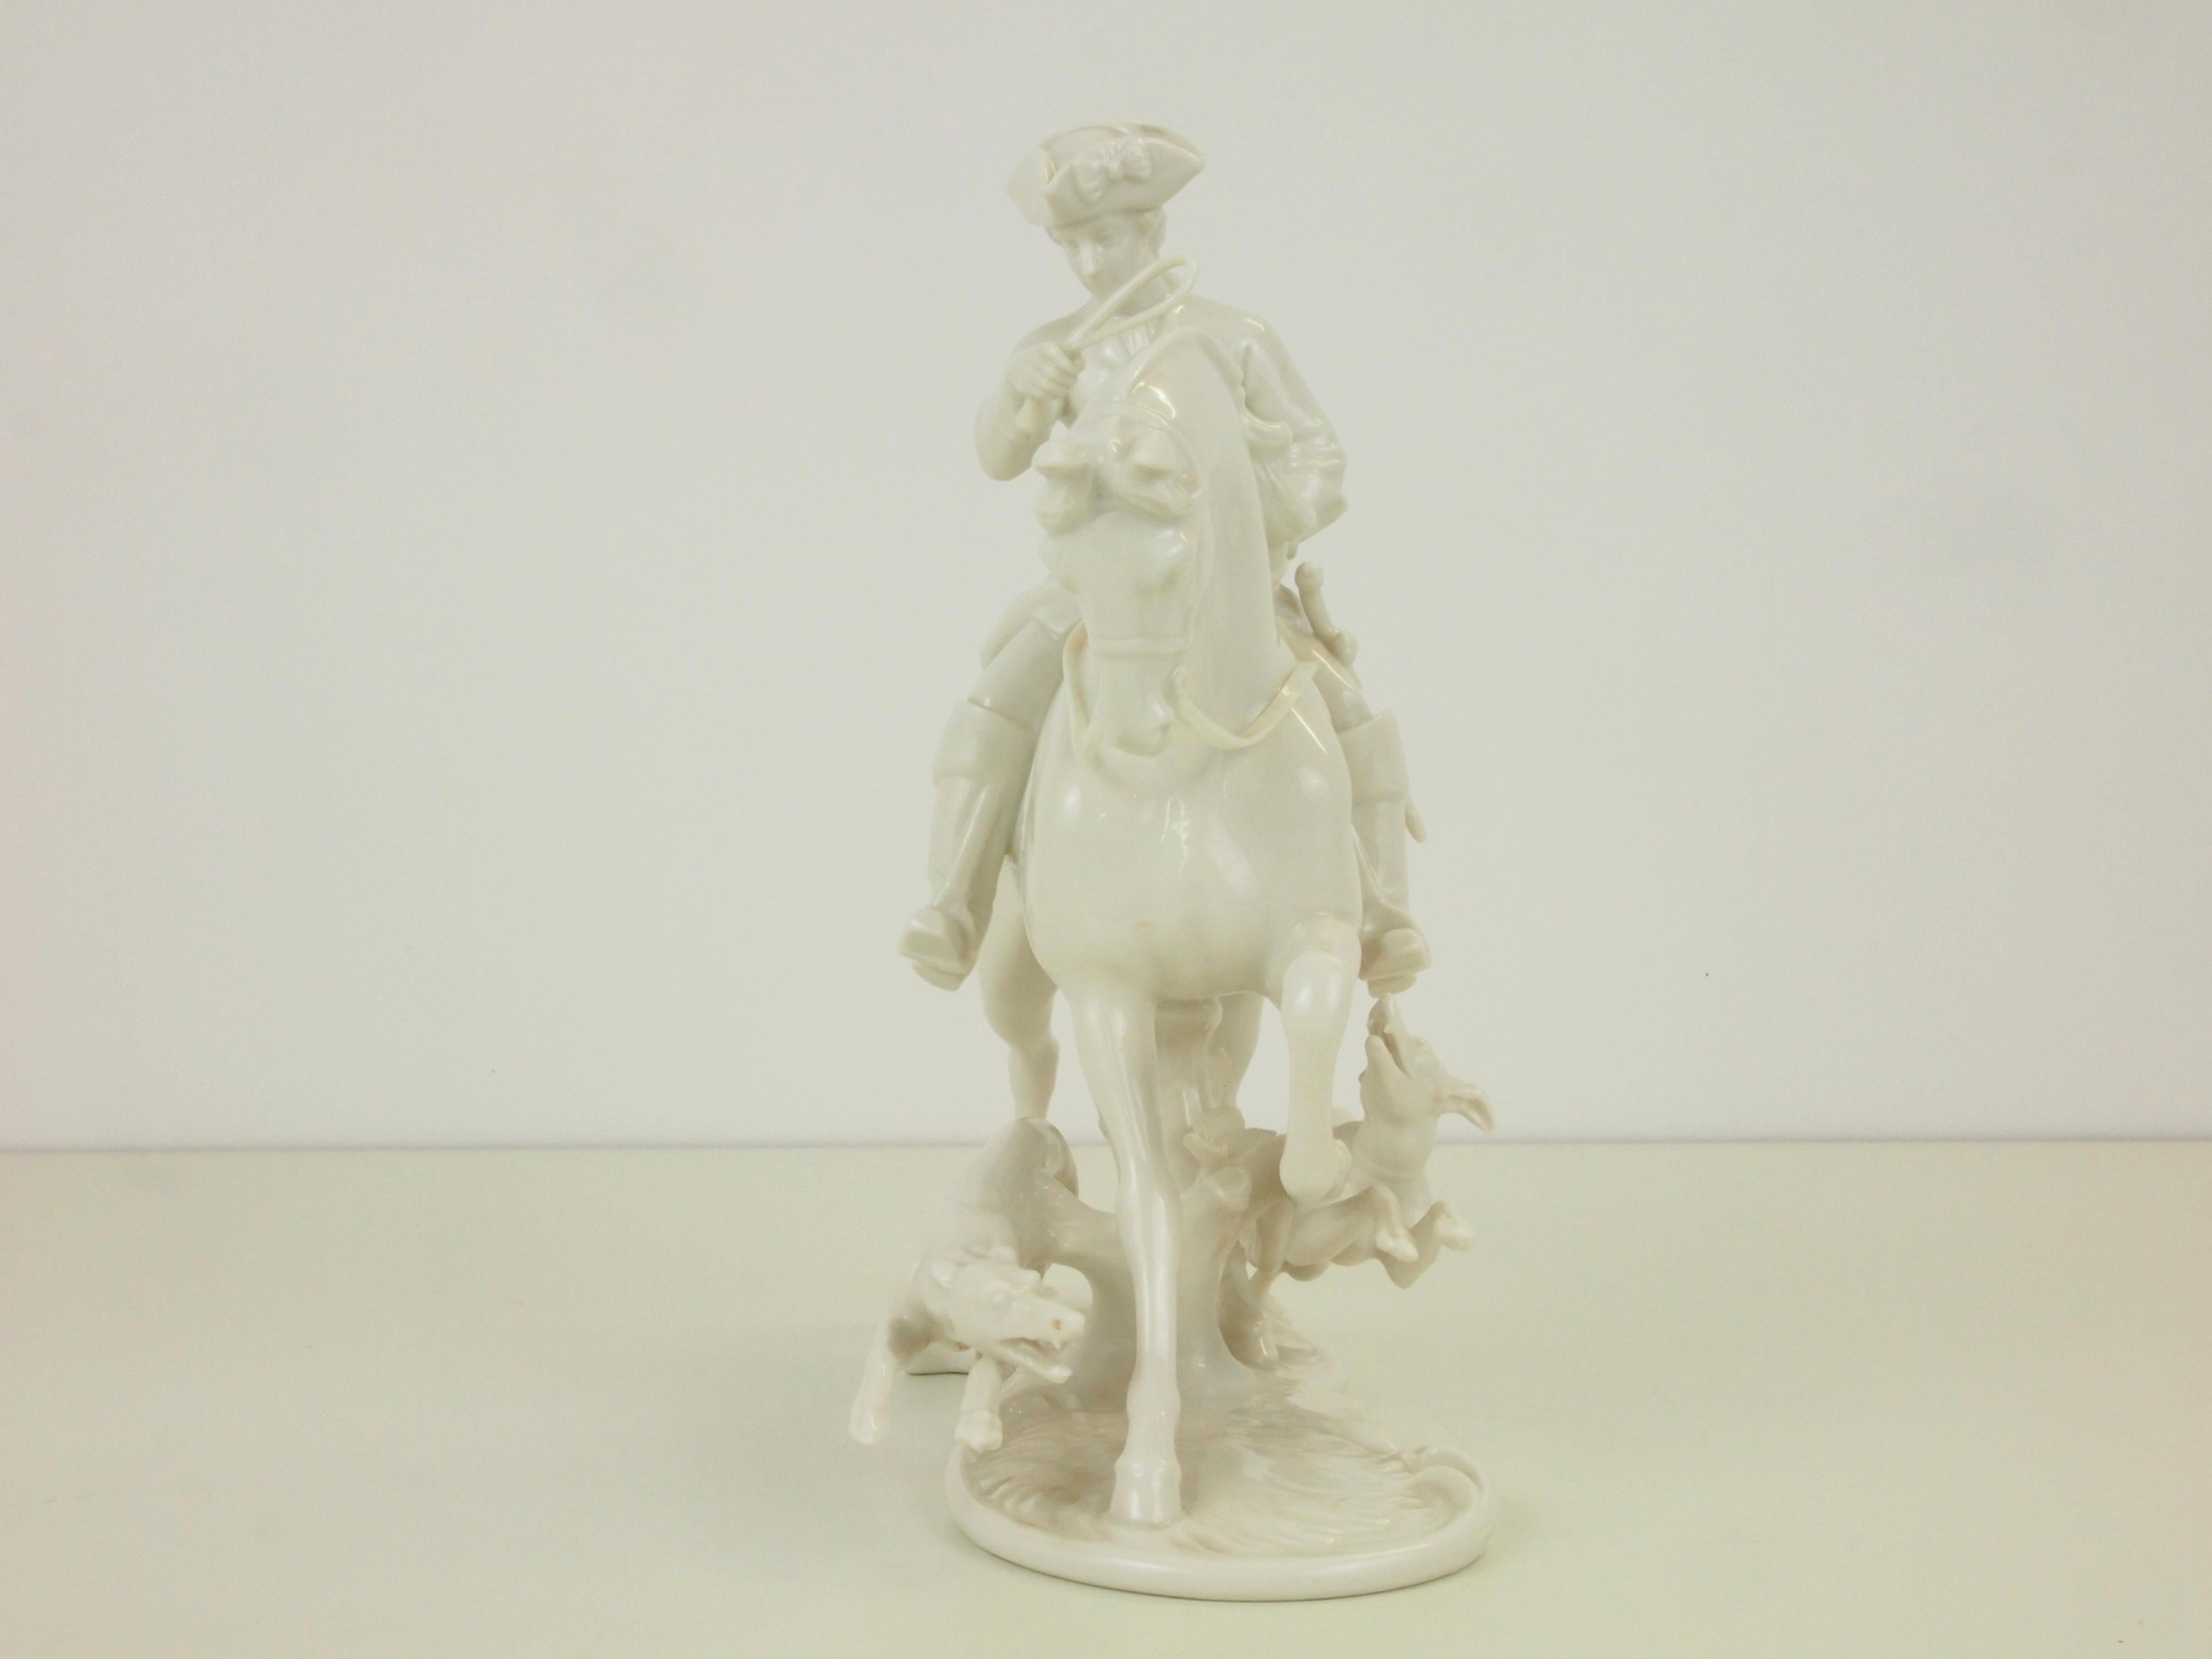 20th Century Nymphenburg Porcelain Figurine Depicting a Horse Rider in a Hunting Scene For Sale